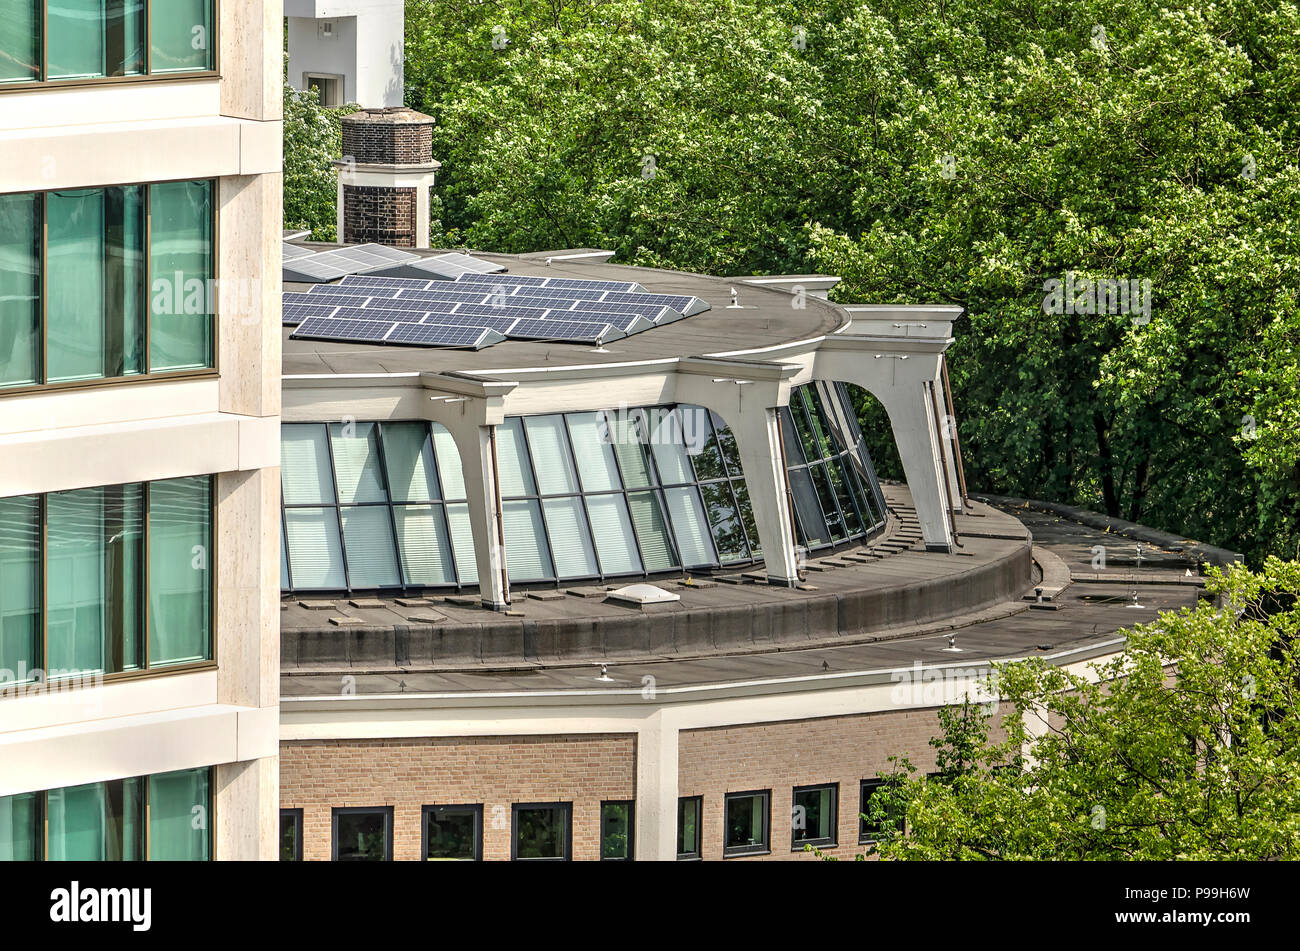 Rotterdam, The Netherlands, June 3, 2018: high angle view of the Bouwcentrum (construction center) by architect J.W. Boks, a municipal monument from t Stock Photo